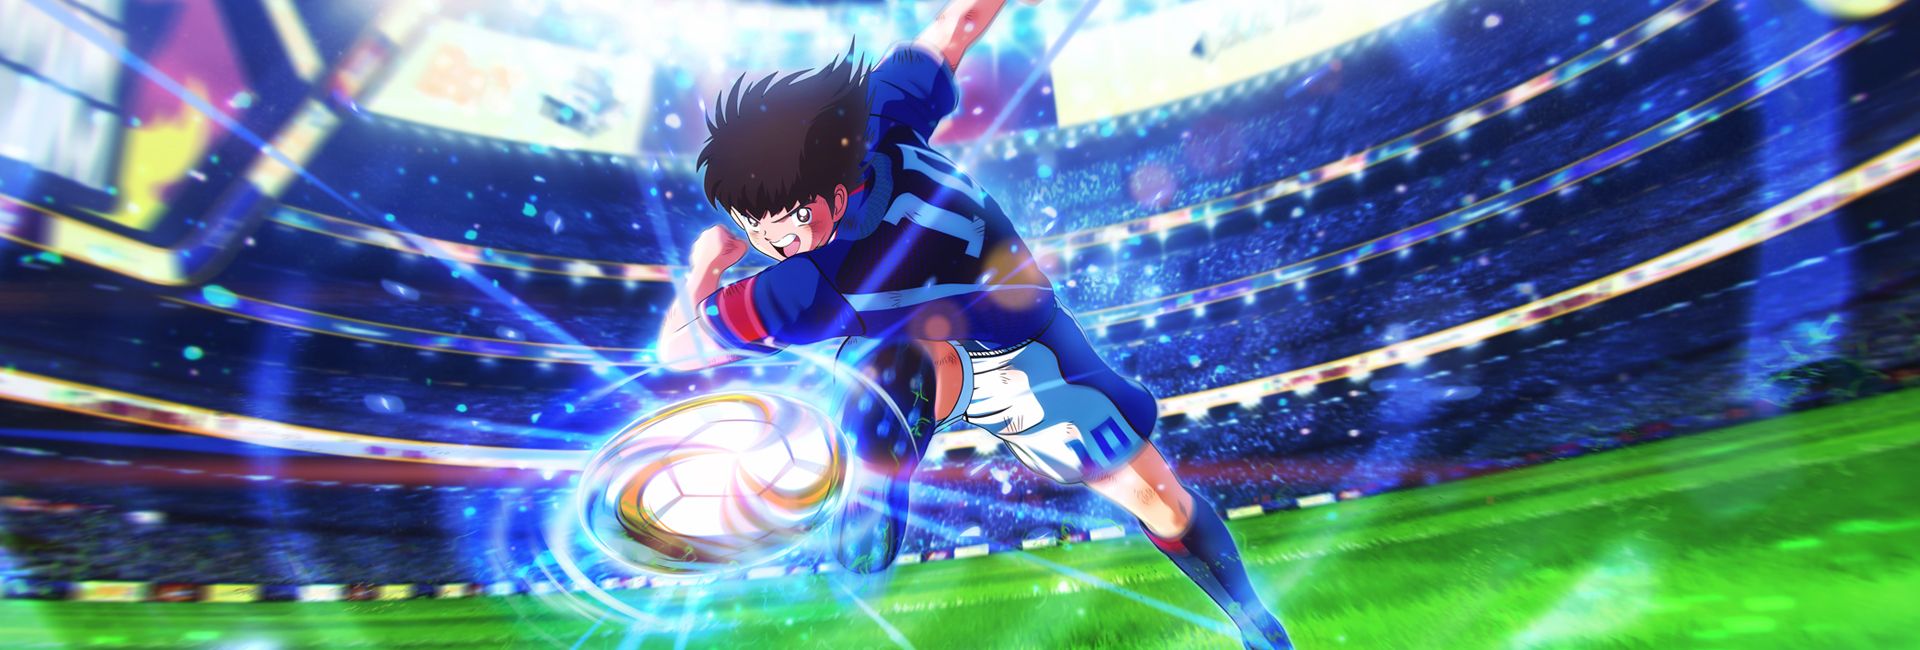 Captain Tsubasa: Rise of New Champions announced for Nintendo Switch